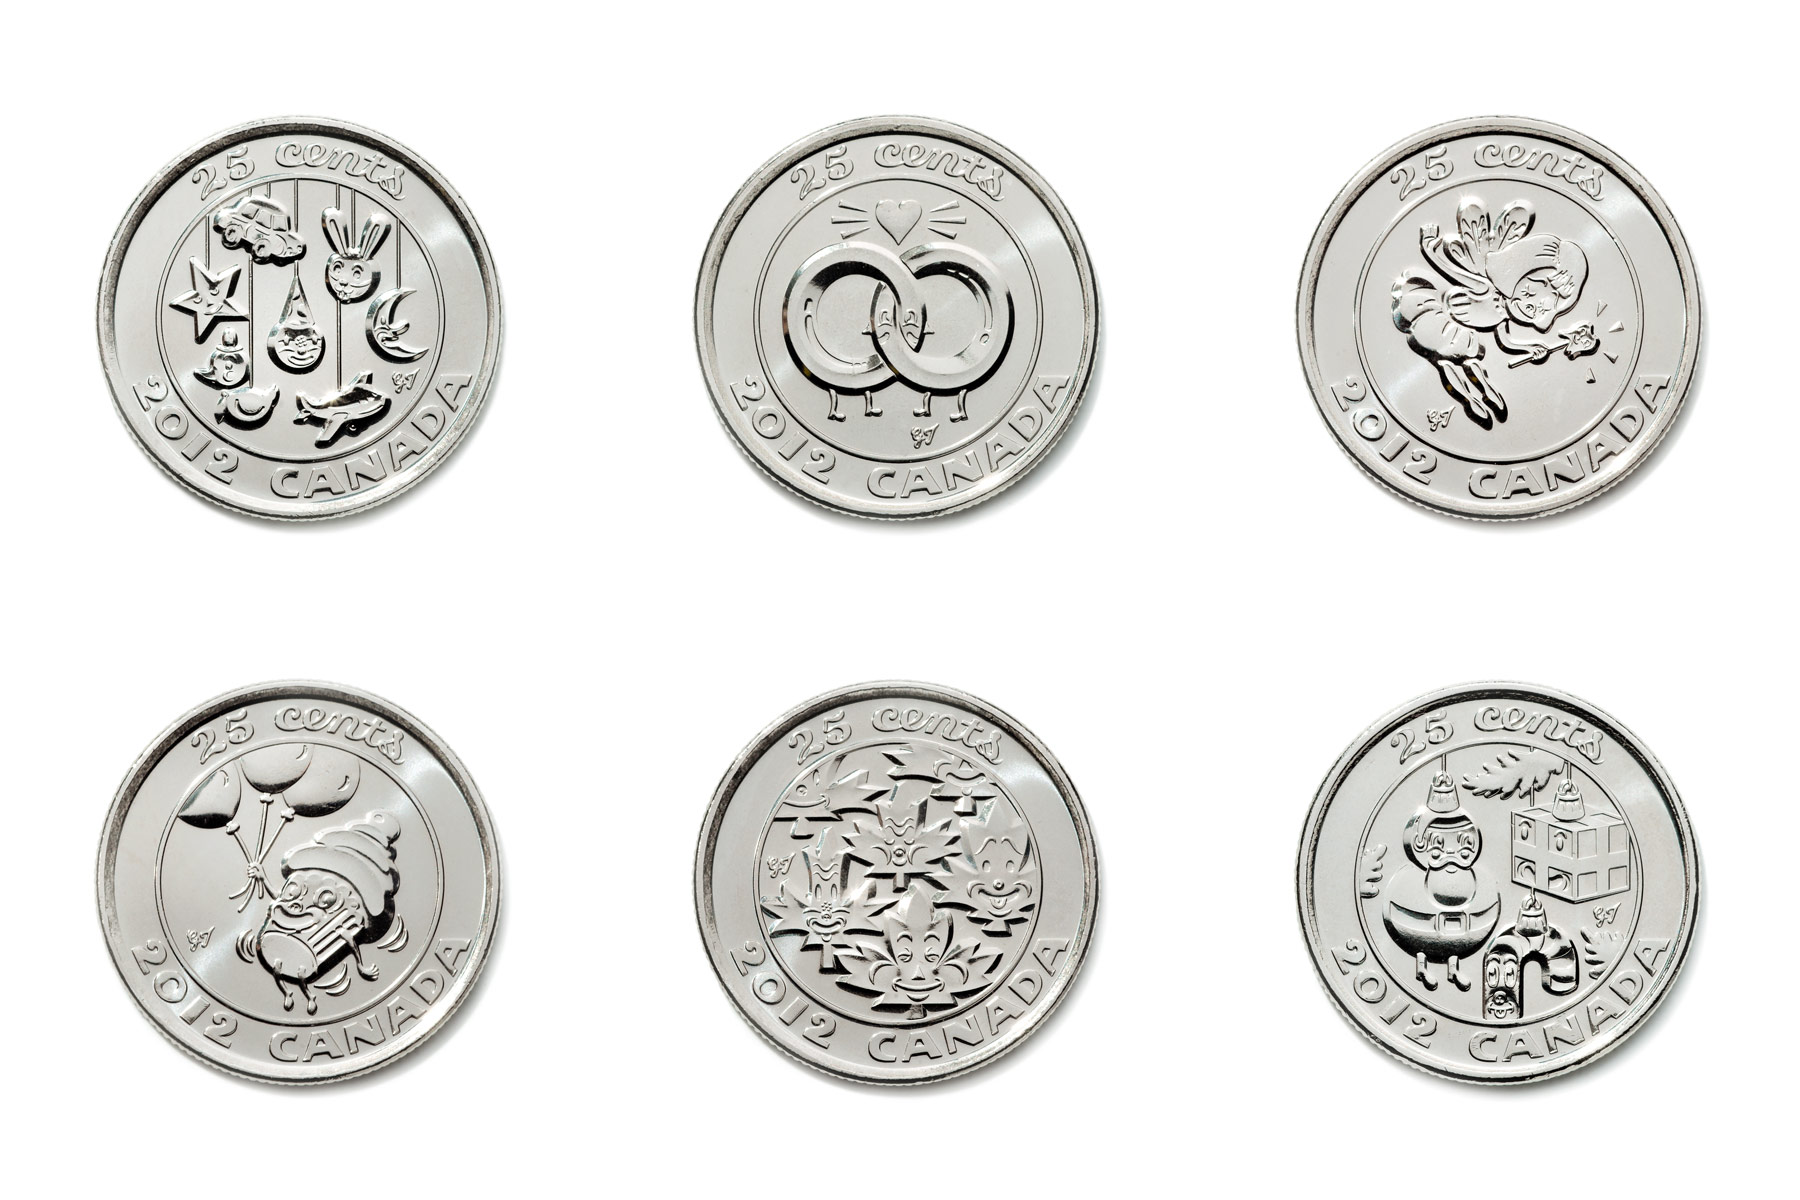 Royal Canadian Mint coins